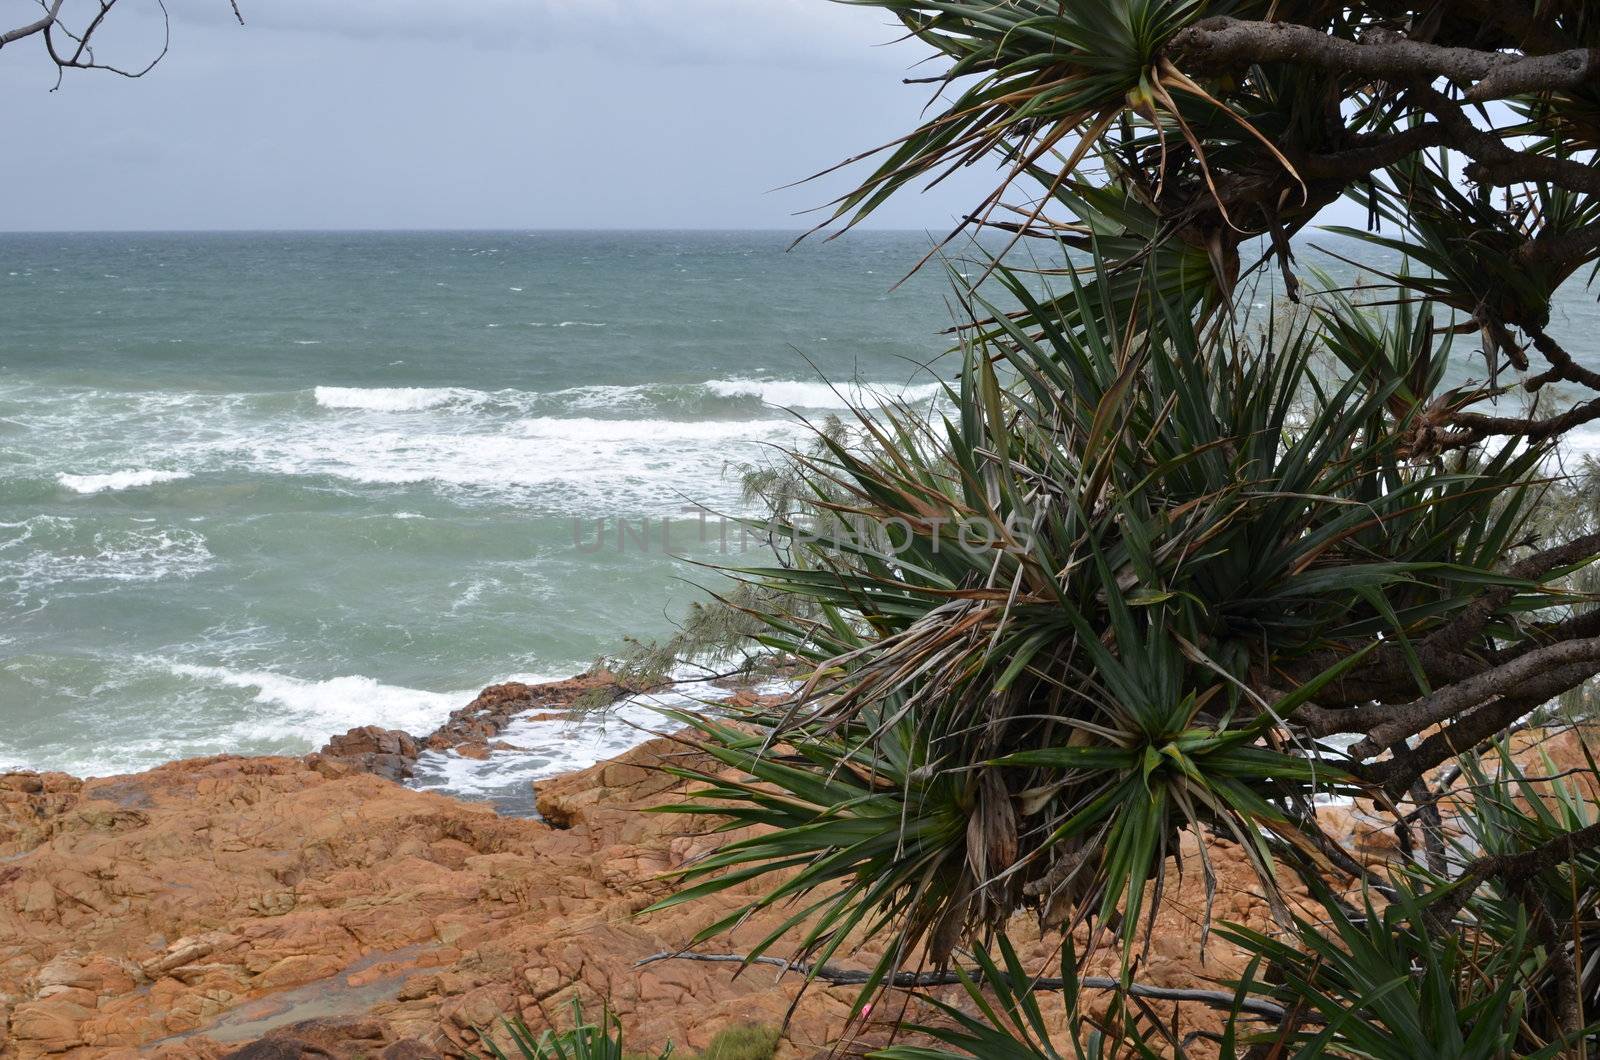 A rocky part of Queensland's Sunshine Coast. In the foreground are branches of a Pandanus Palm. A species which is endemic to Australia's east coast.